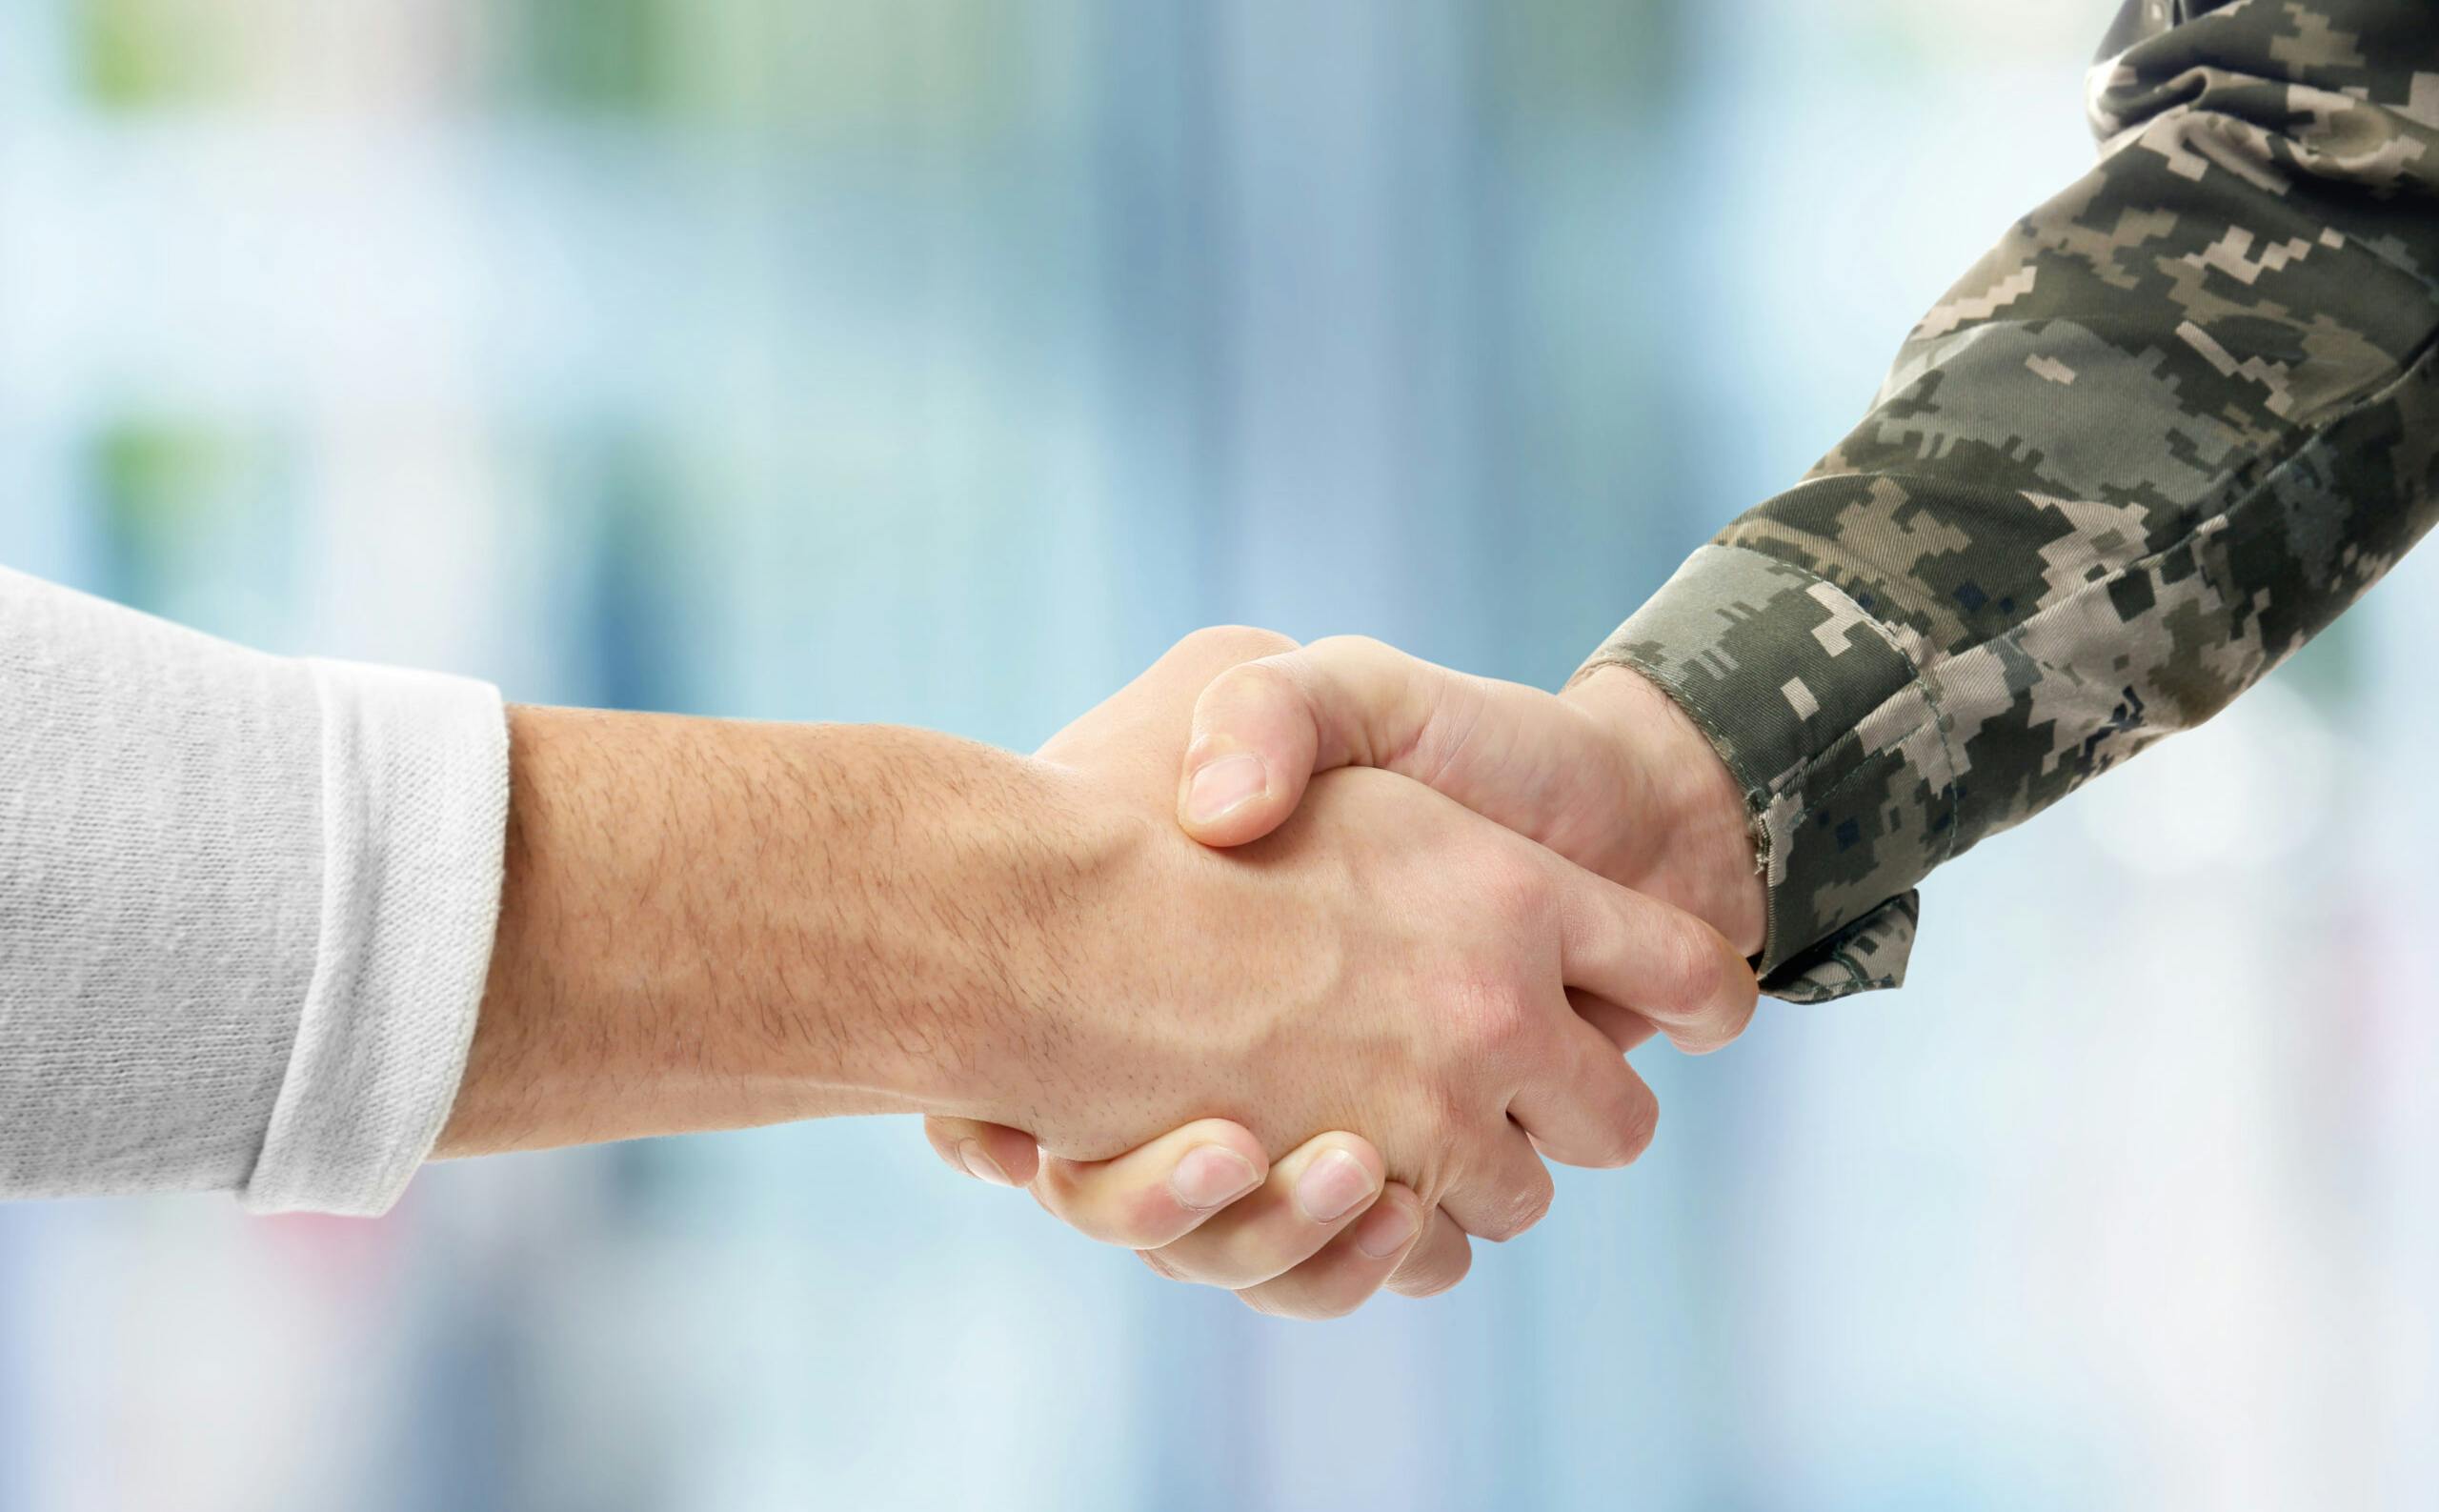 Image of people shaking hands. One arm is covered in army fatigues, the other has a white shirt on.